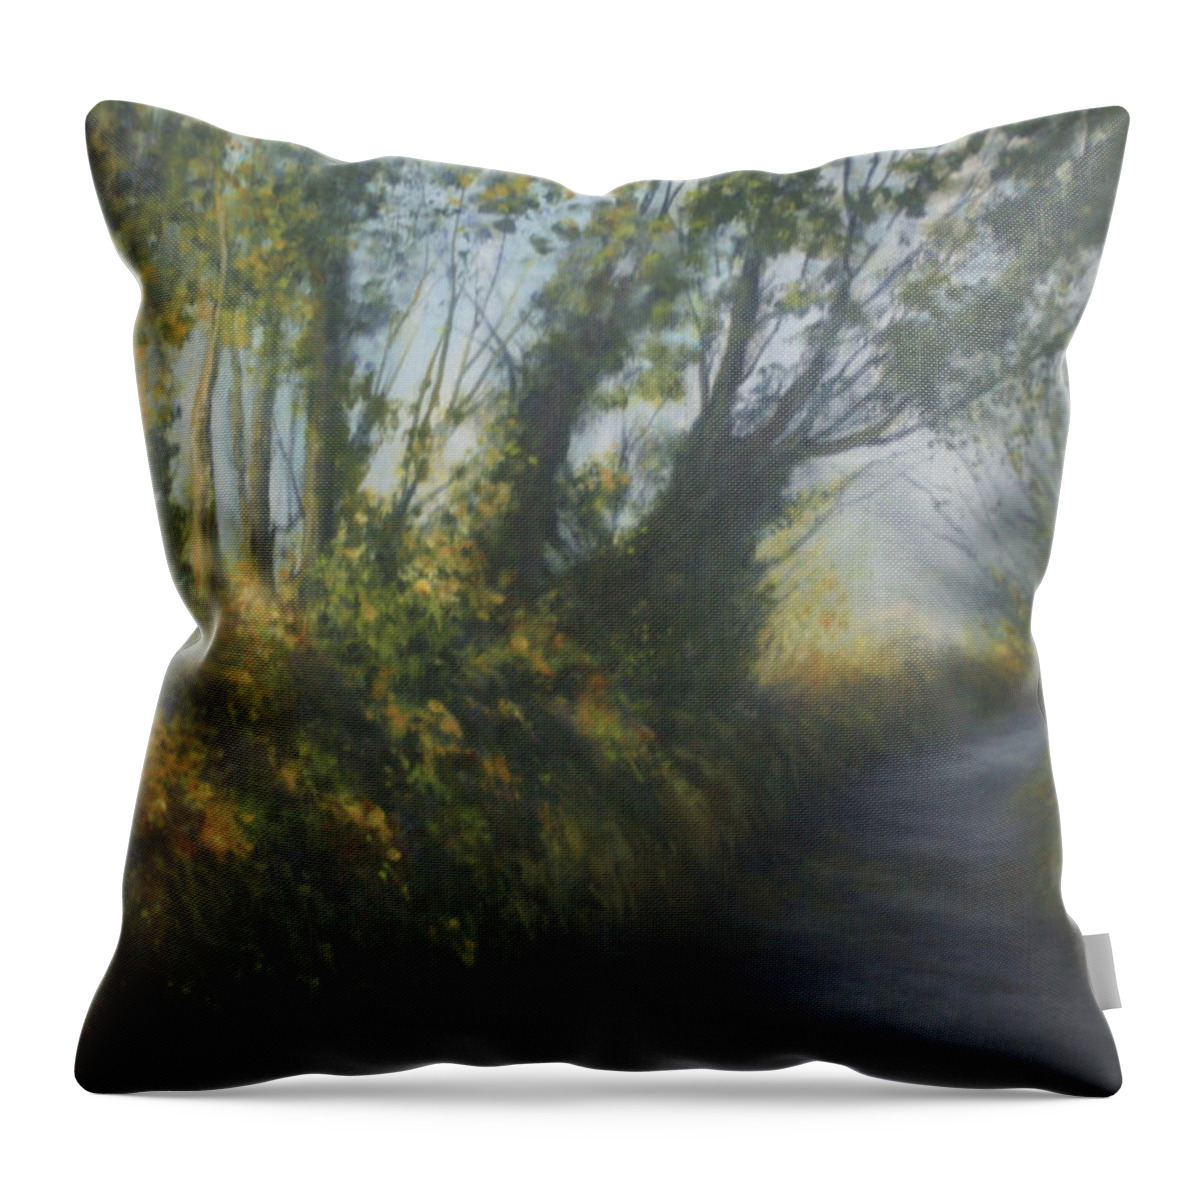 Landscape Throw Pillow featuring the painting Afternoon Walk by Valerie Travers